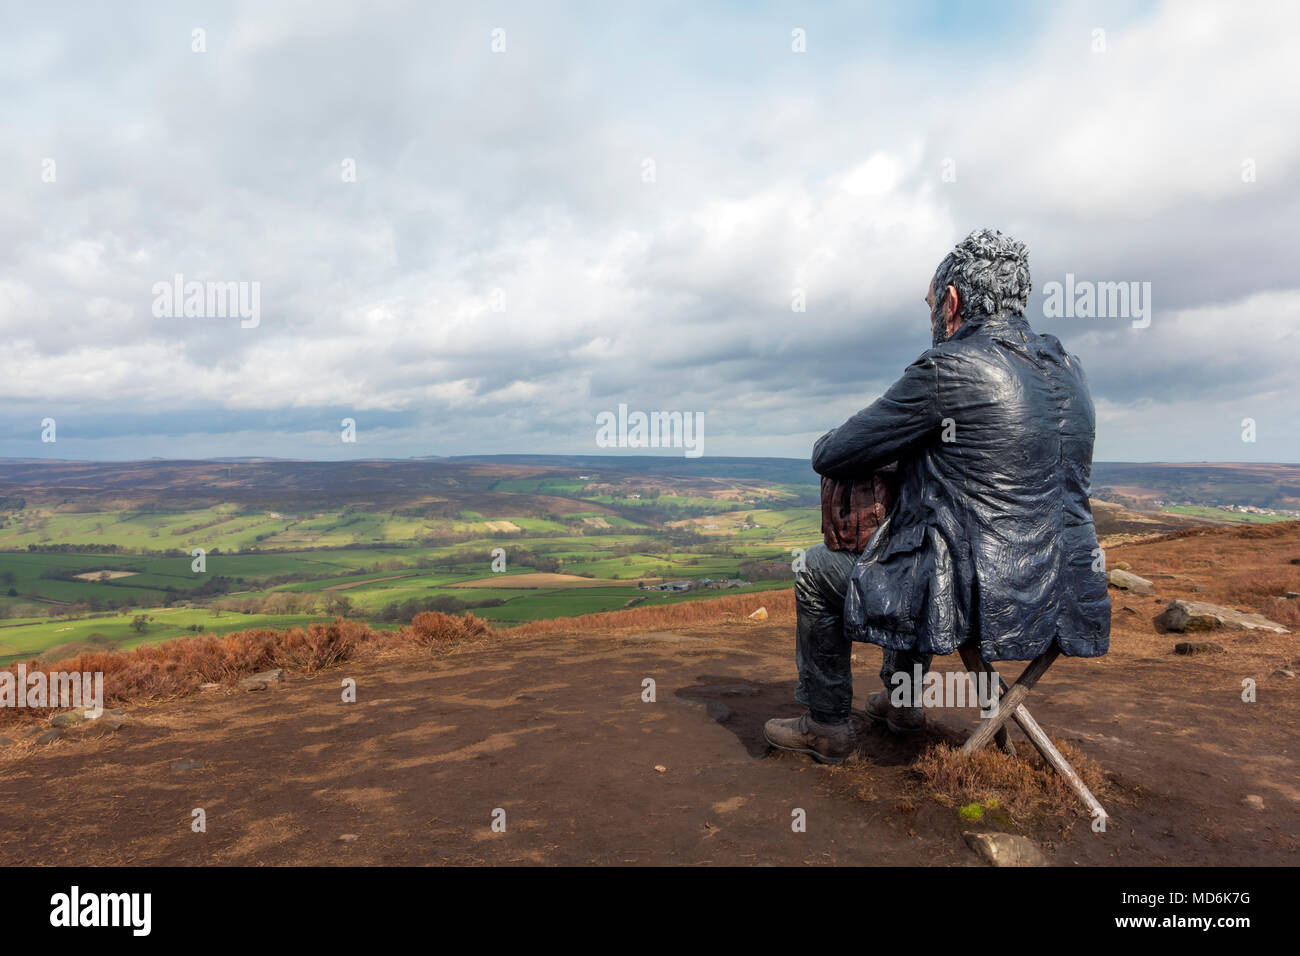 The Seated Man Sculpture by artist Sean Henry on Castleton Rigg a high point in the North Yorkshire Moors National Park overlooking Westerdale Stock Photo